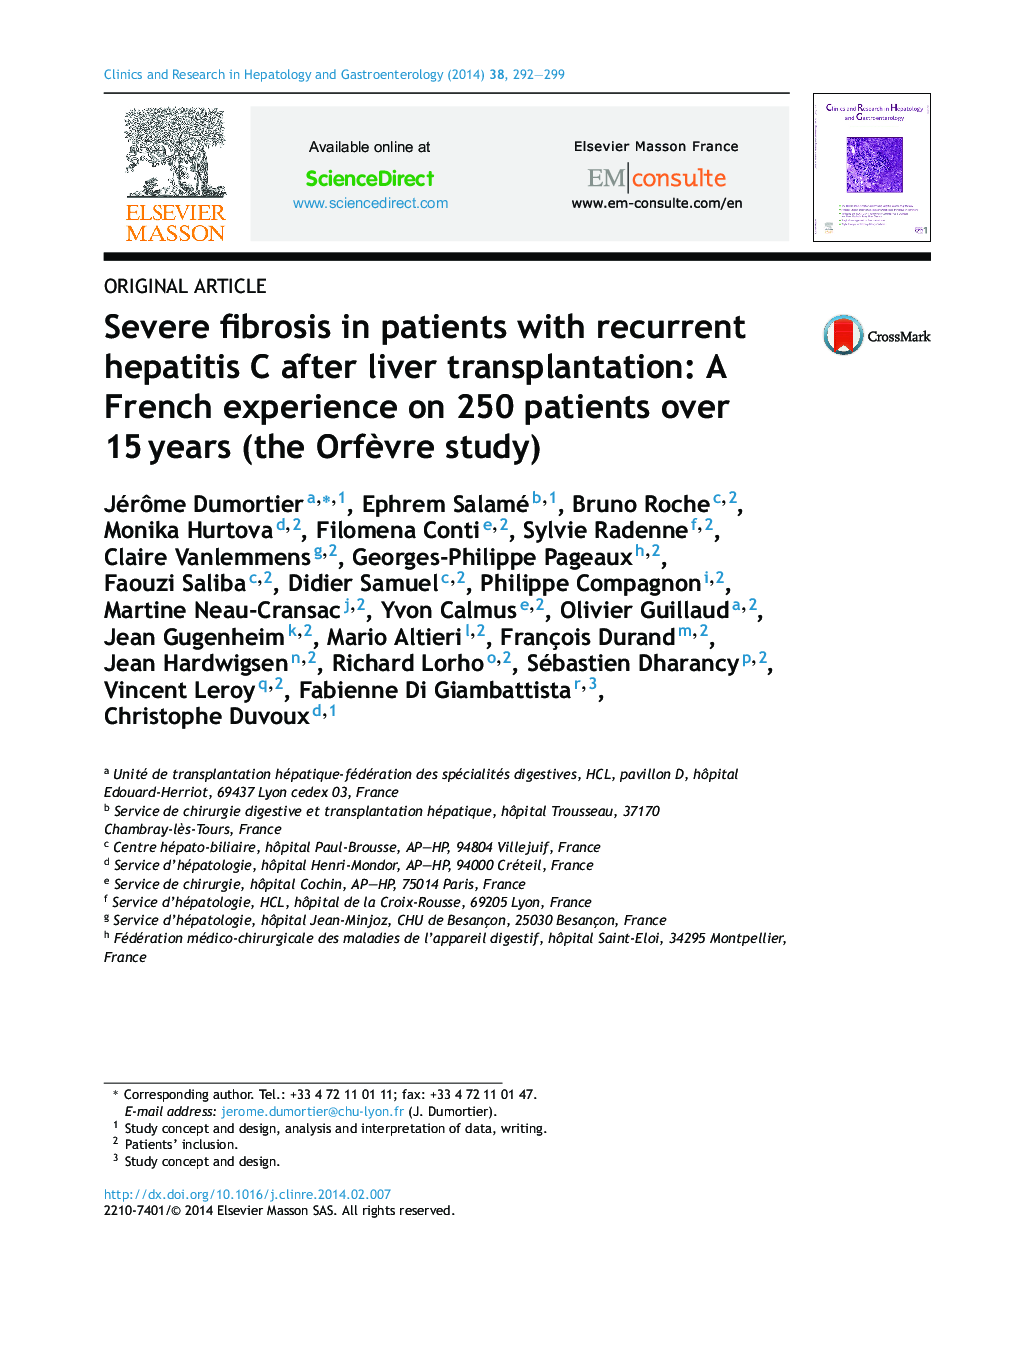 Severe fibrosis in patients with recurrent hepatitis C after liver transplantation: A French experience on 250 patients over 15 years (the Orfèvre study)